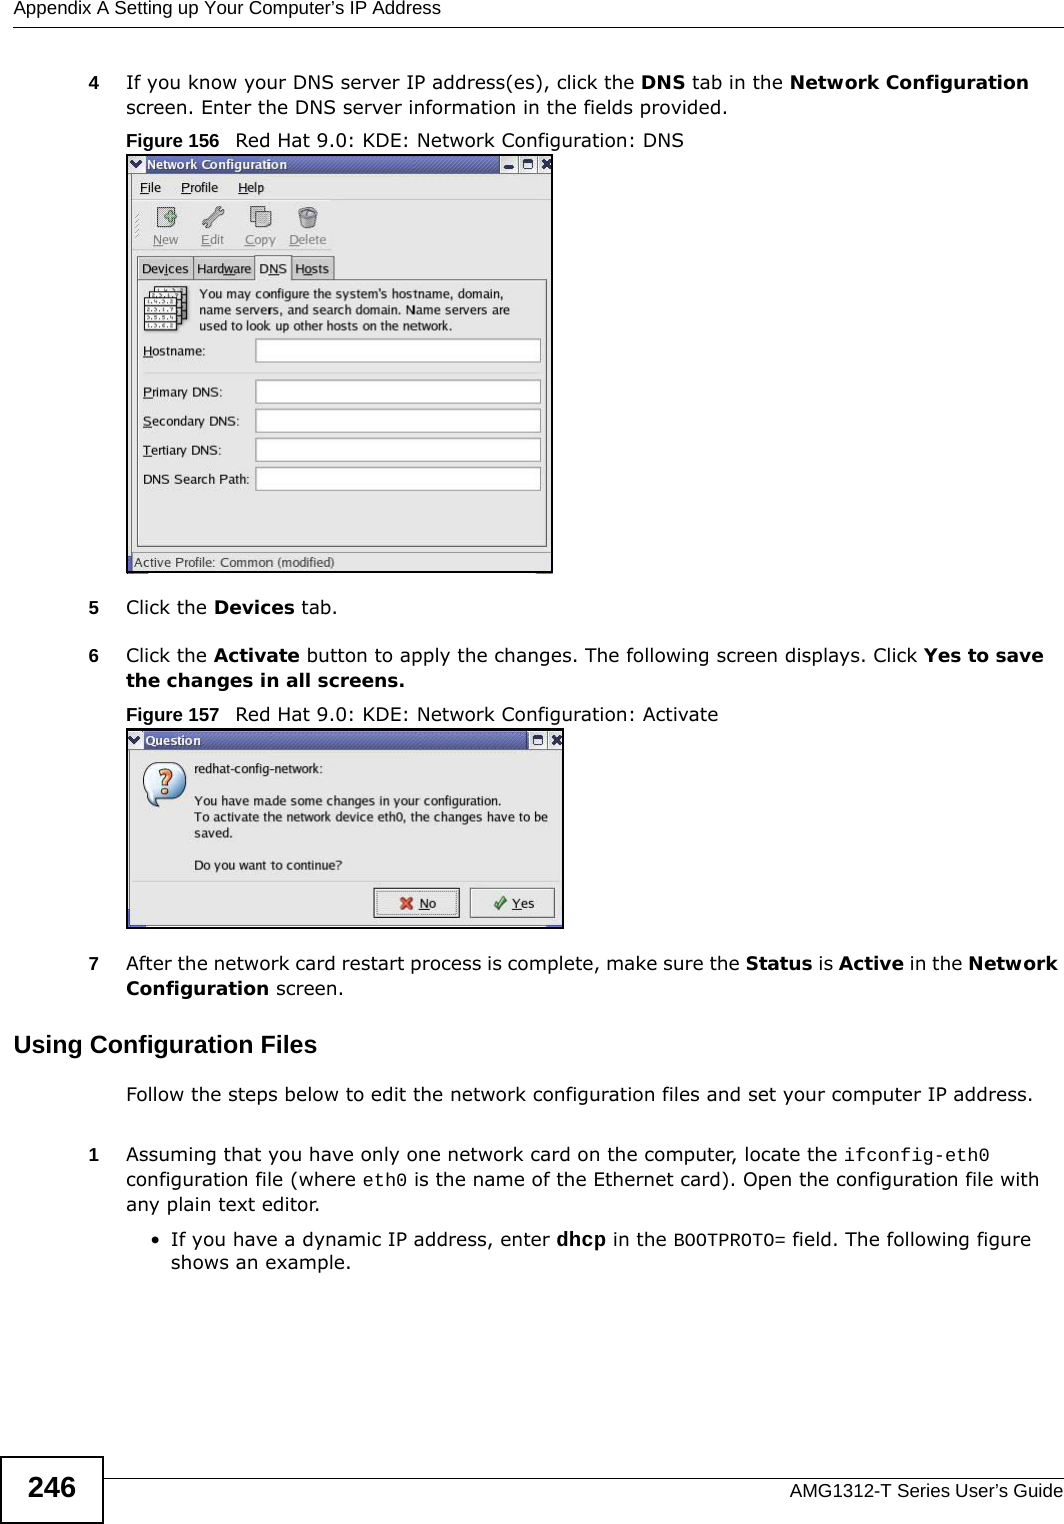 Appendix A Setting up Your Computer’s IP AddressAMG1312-T Series User’s Guide2464If you know your DNS server IP address(es), click the DNS tab in the Network Configuration screen. Enter the DNS server information in the fields provided. Figure 156   Red Hat 9.0: KDE: Network Configuration: DNS 5Click the Devices tab. 6Click the Activate button to apply the changes. The following screen displays. Click Yes to save the changes in all screens.Figure 157   Red Hat 9.0: KDE: Network Configuration: Activate  7After the network card restart process is complete, make sure the Status is Active in the Network Configuration screen.Using Configuration FilesFollow the steps below to edit the network configuration files and set your computer IP address. 1Assuming that you have only one network card on the computer, locate the ifconfig-eth0 configuration file (where eth0 is the name of the Ethernet card). Open the configuration file with any plain text editor.• If you have a dynamic IP address, enter dhcp in the BOOTPROTO= field. The following figure shows an example. 